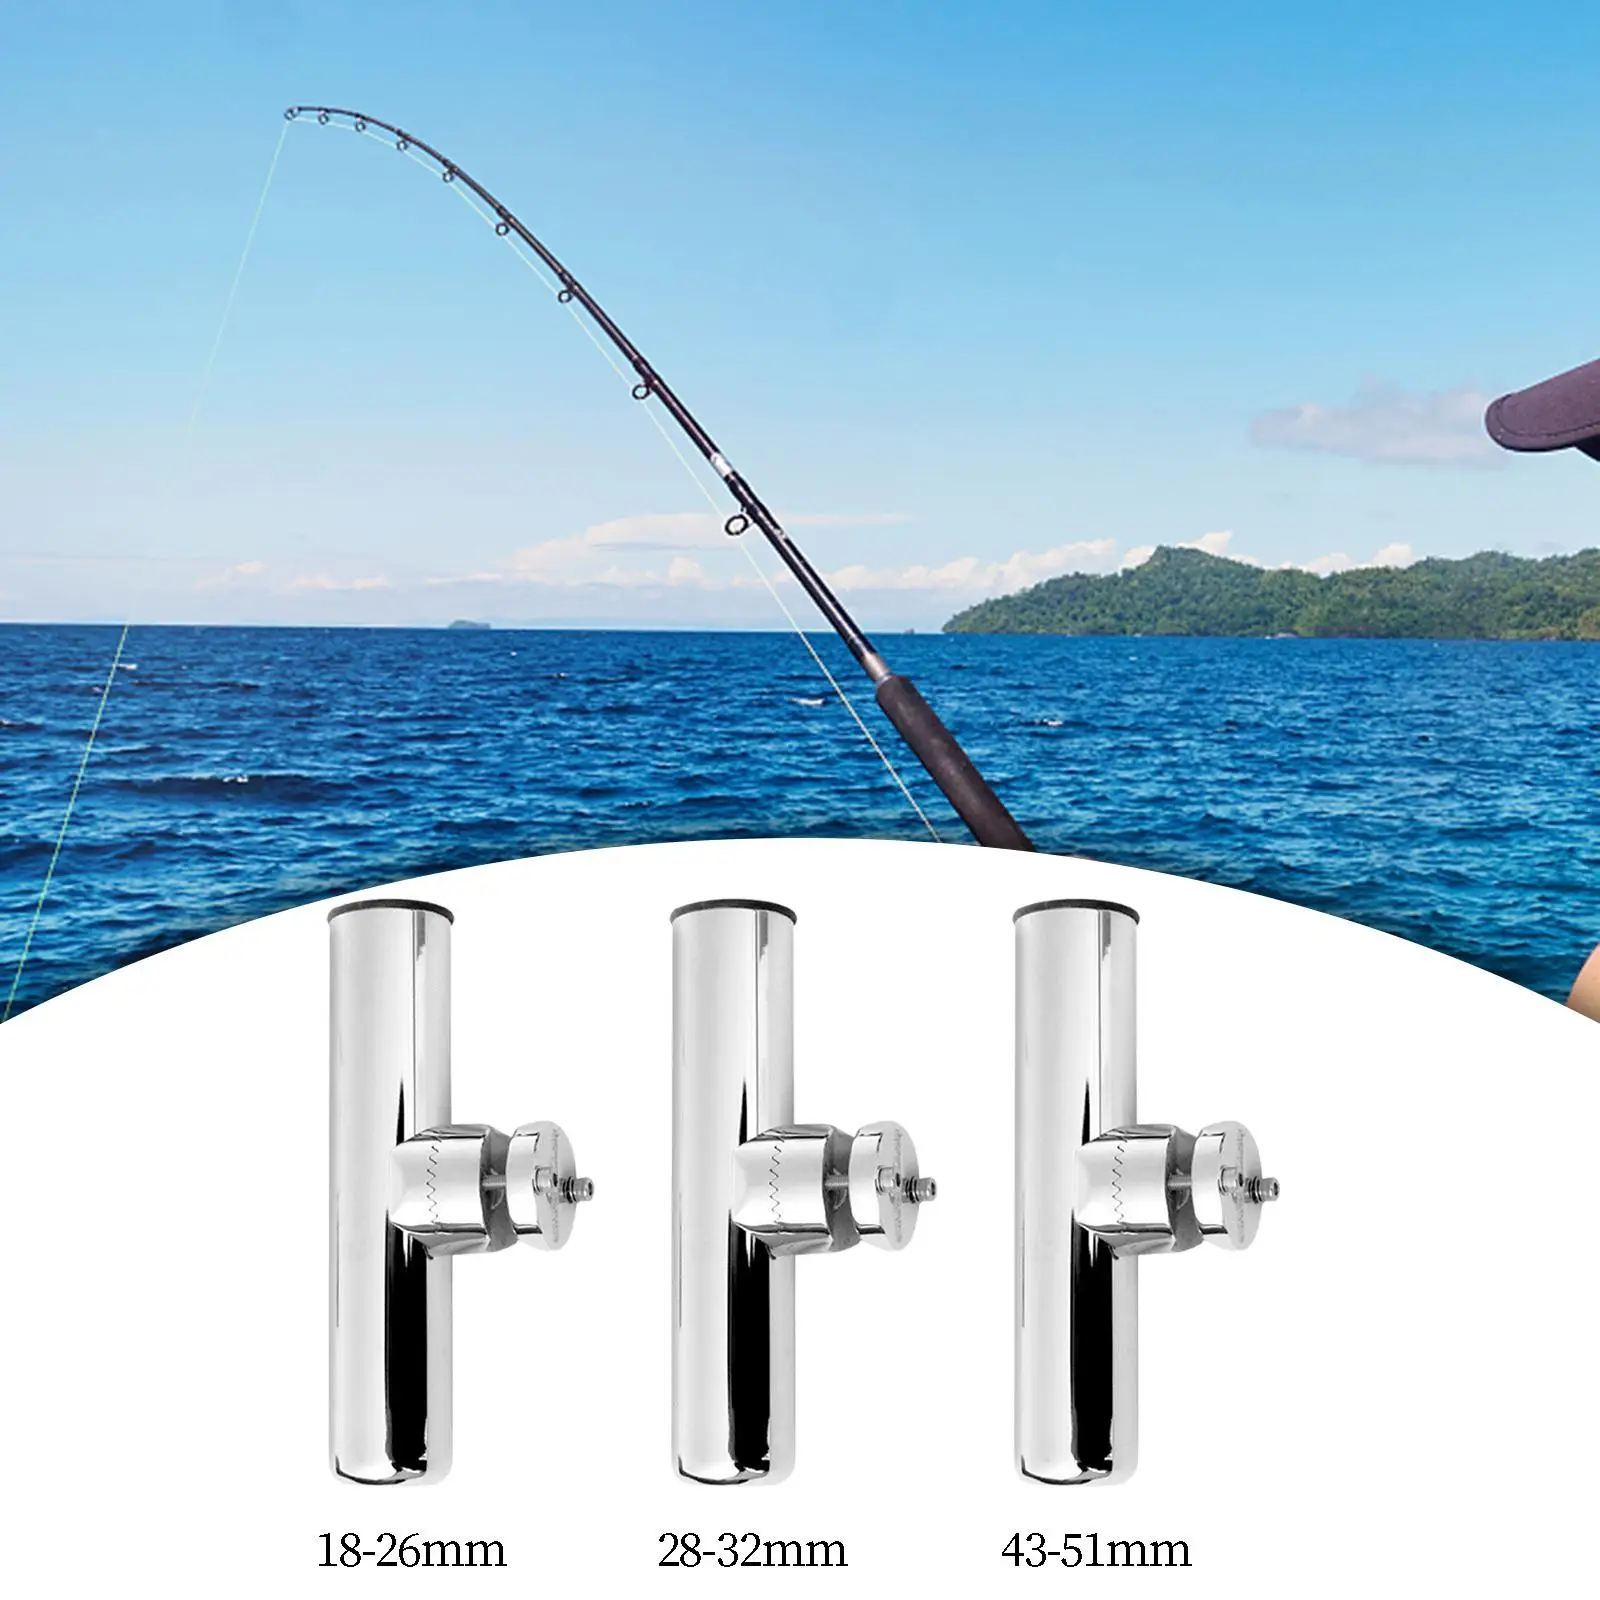 Clamp on Rail Mount Boat Accessories Side Mount Stainless Steel Fishing Rod Holder Bracket Supporting for Kayak Camper RV Truck